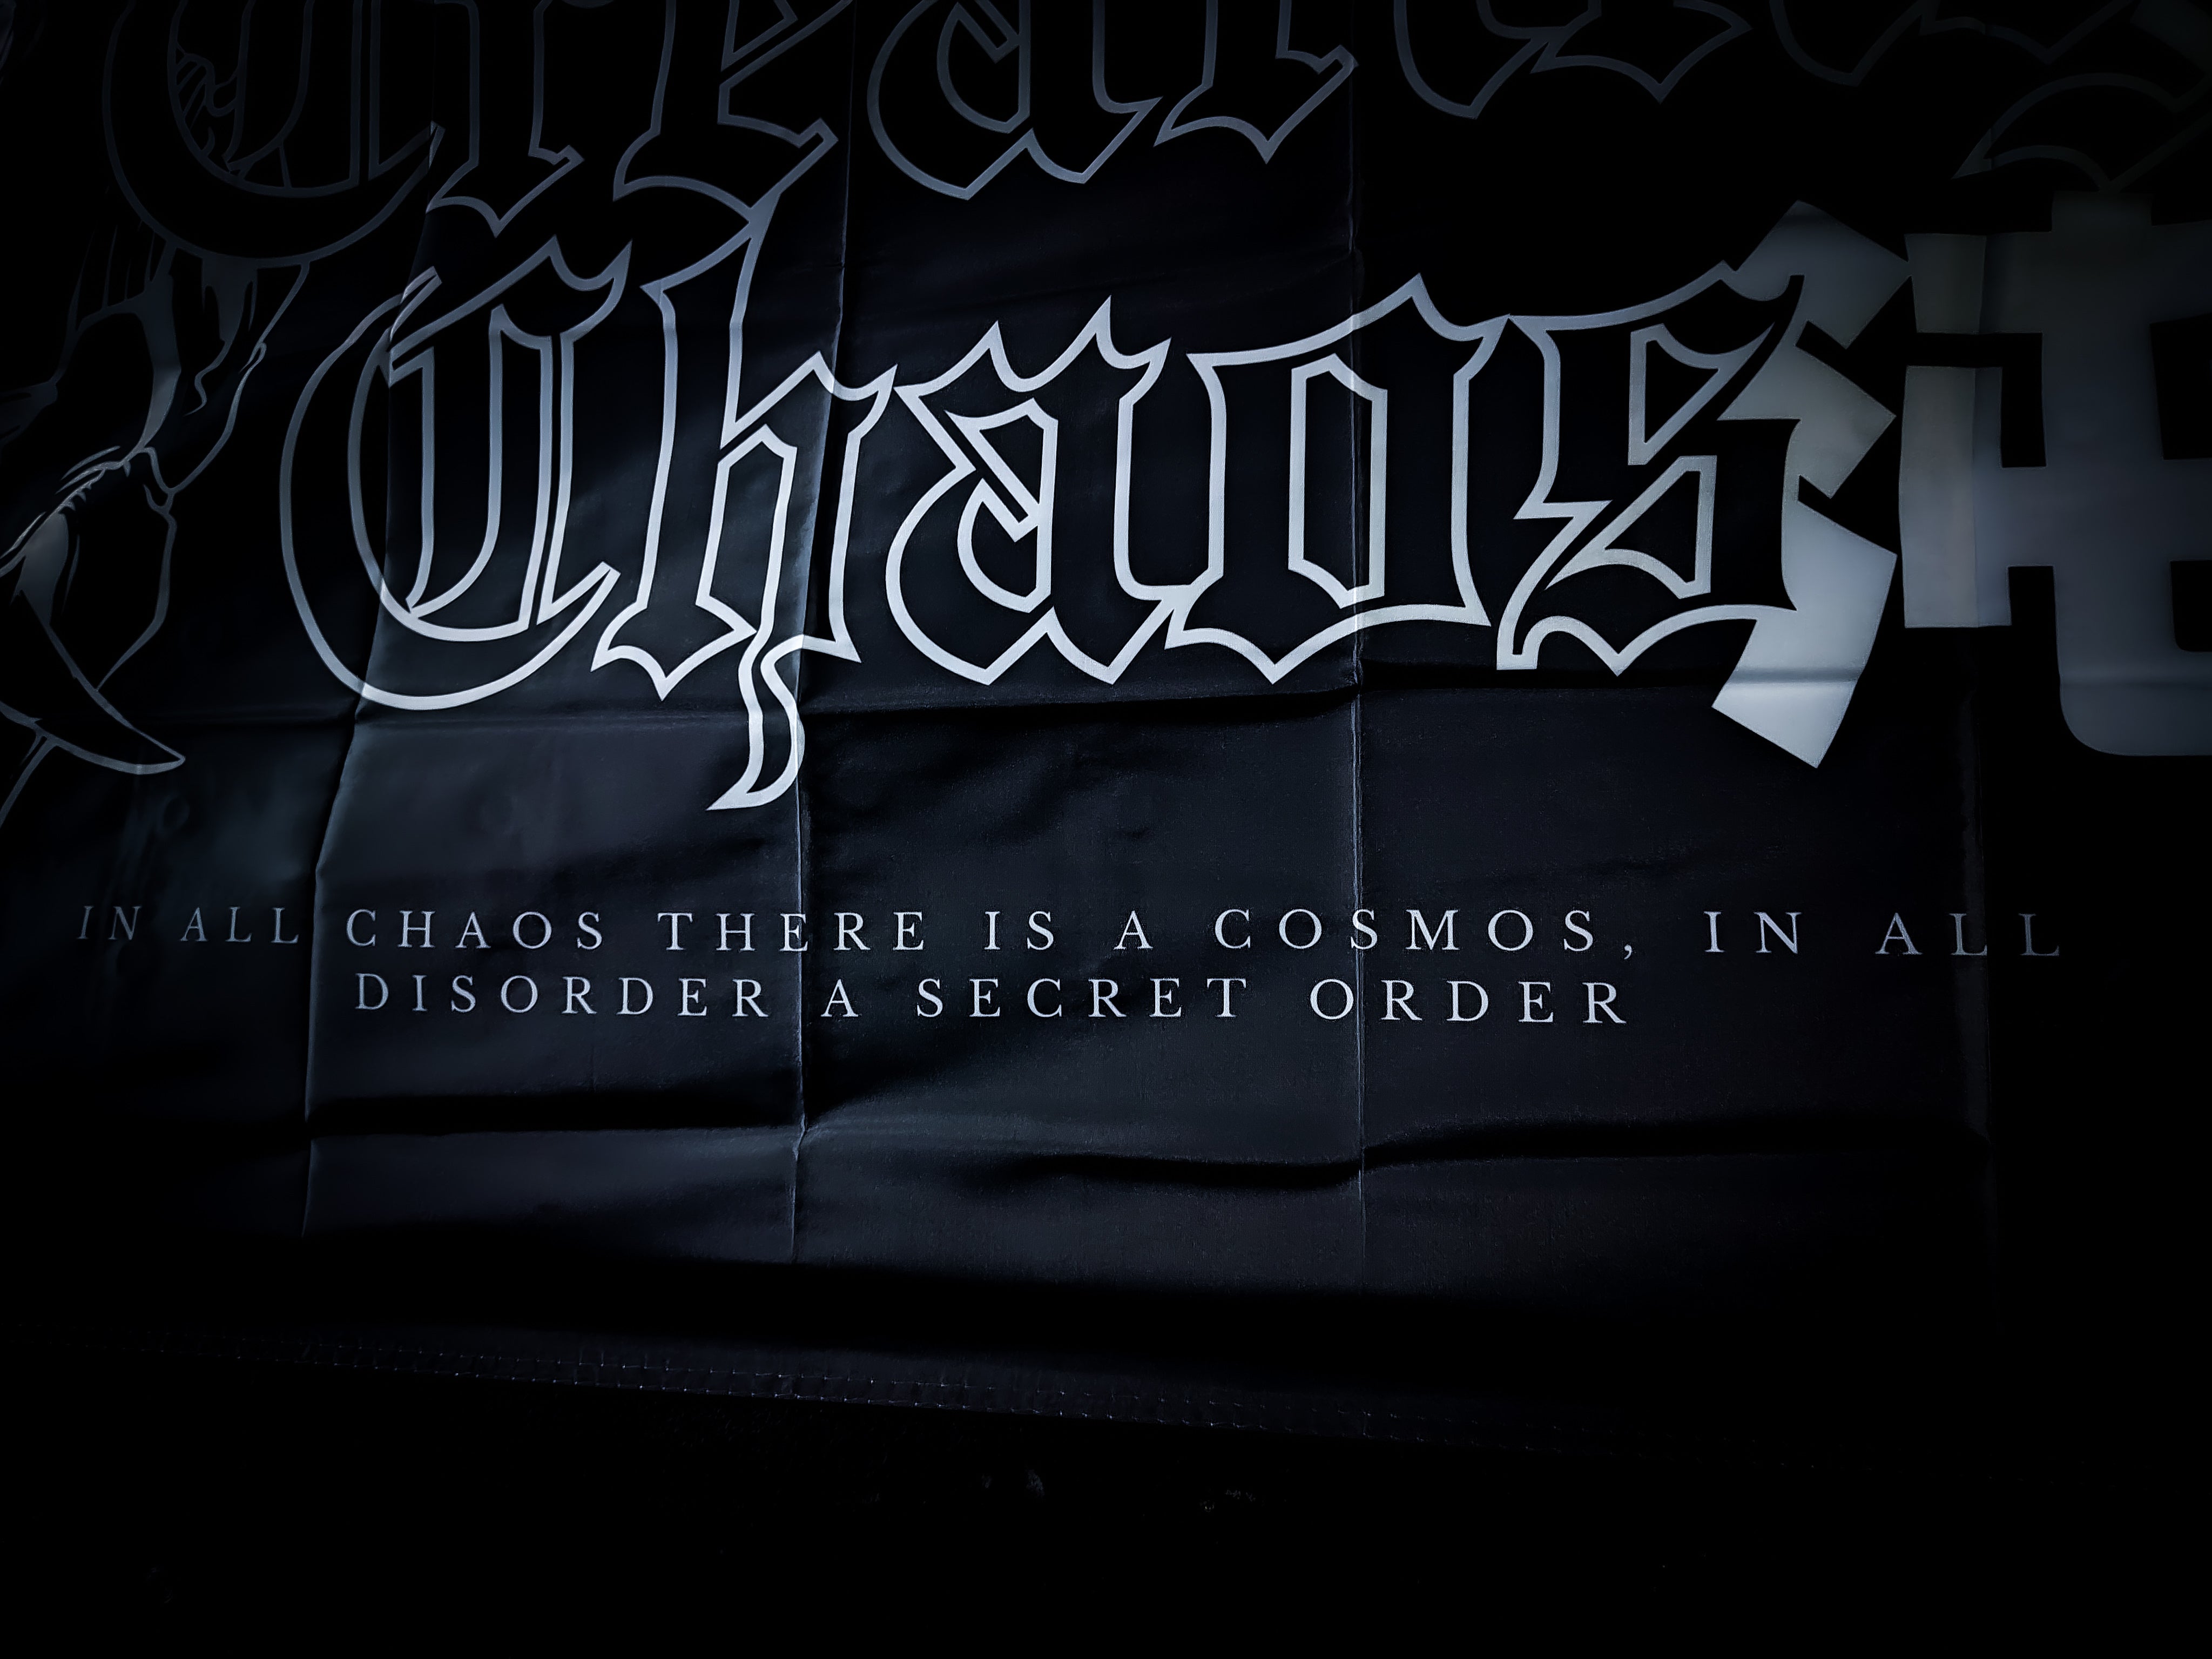 Creating Chaos "In all chaos is a cosmos, in all disorder a secret order"  Workshop Banner Flag